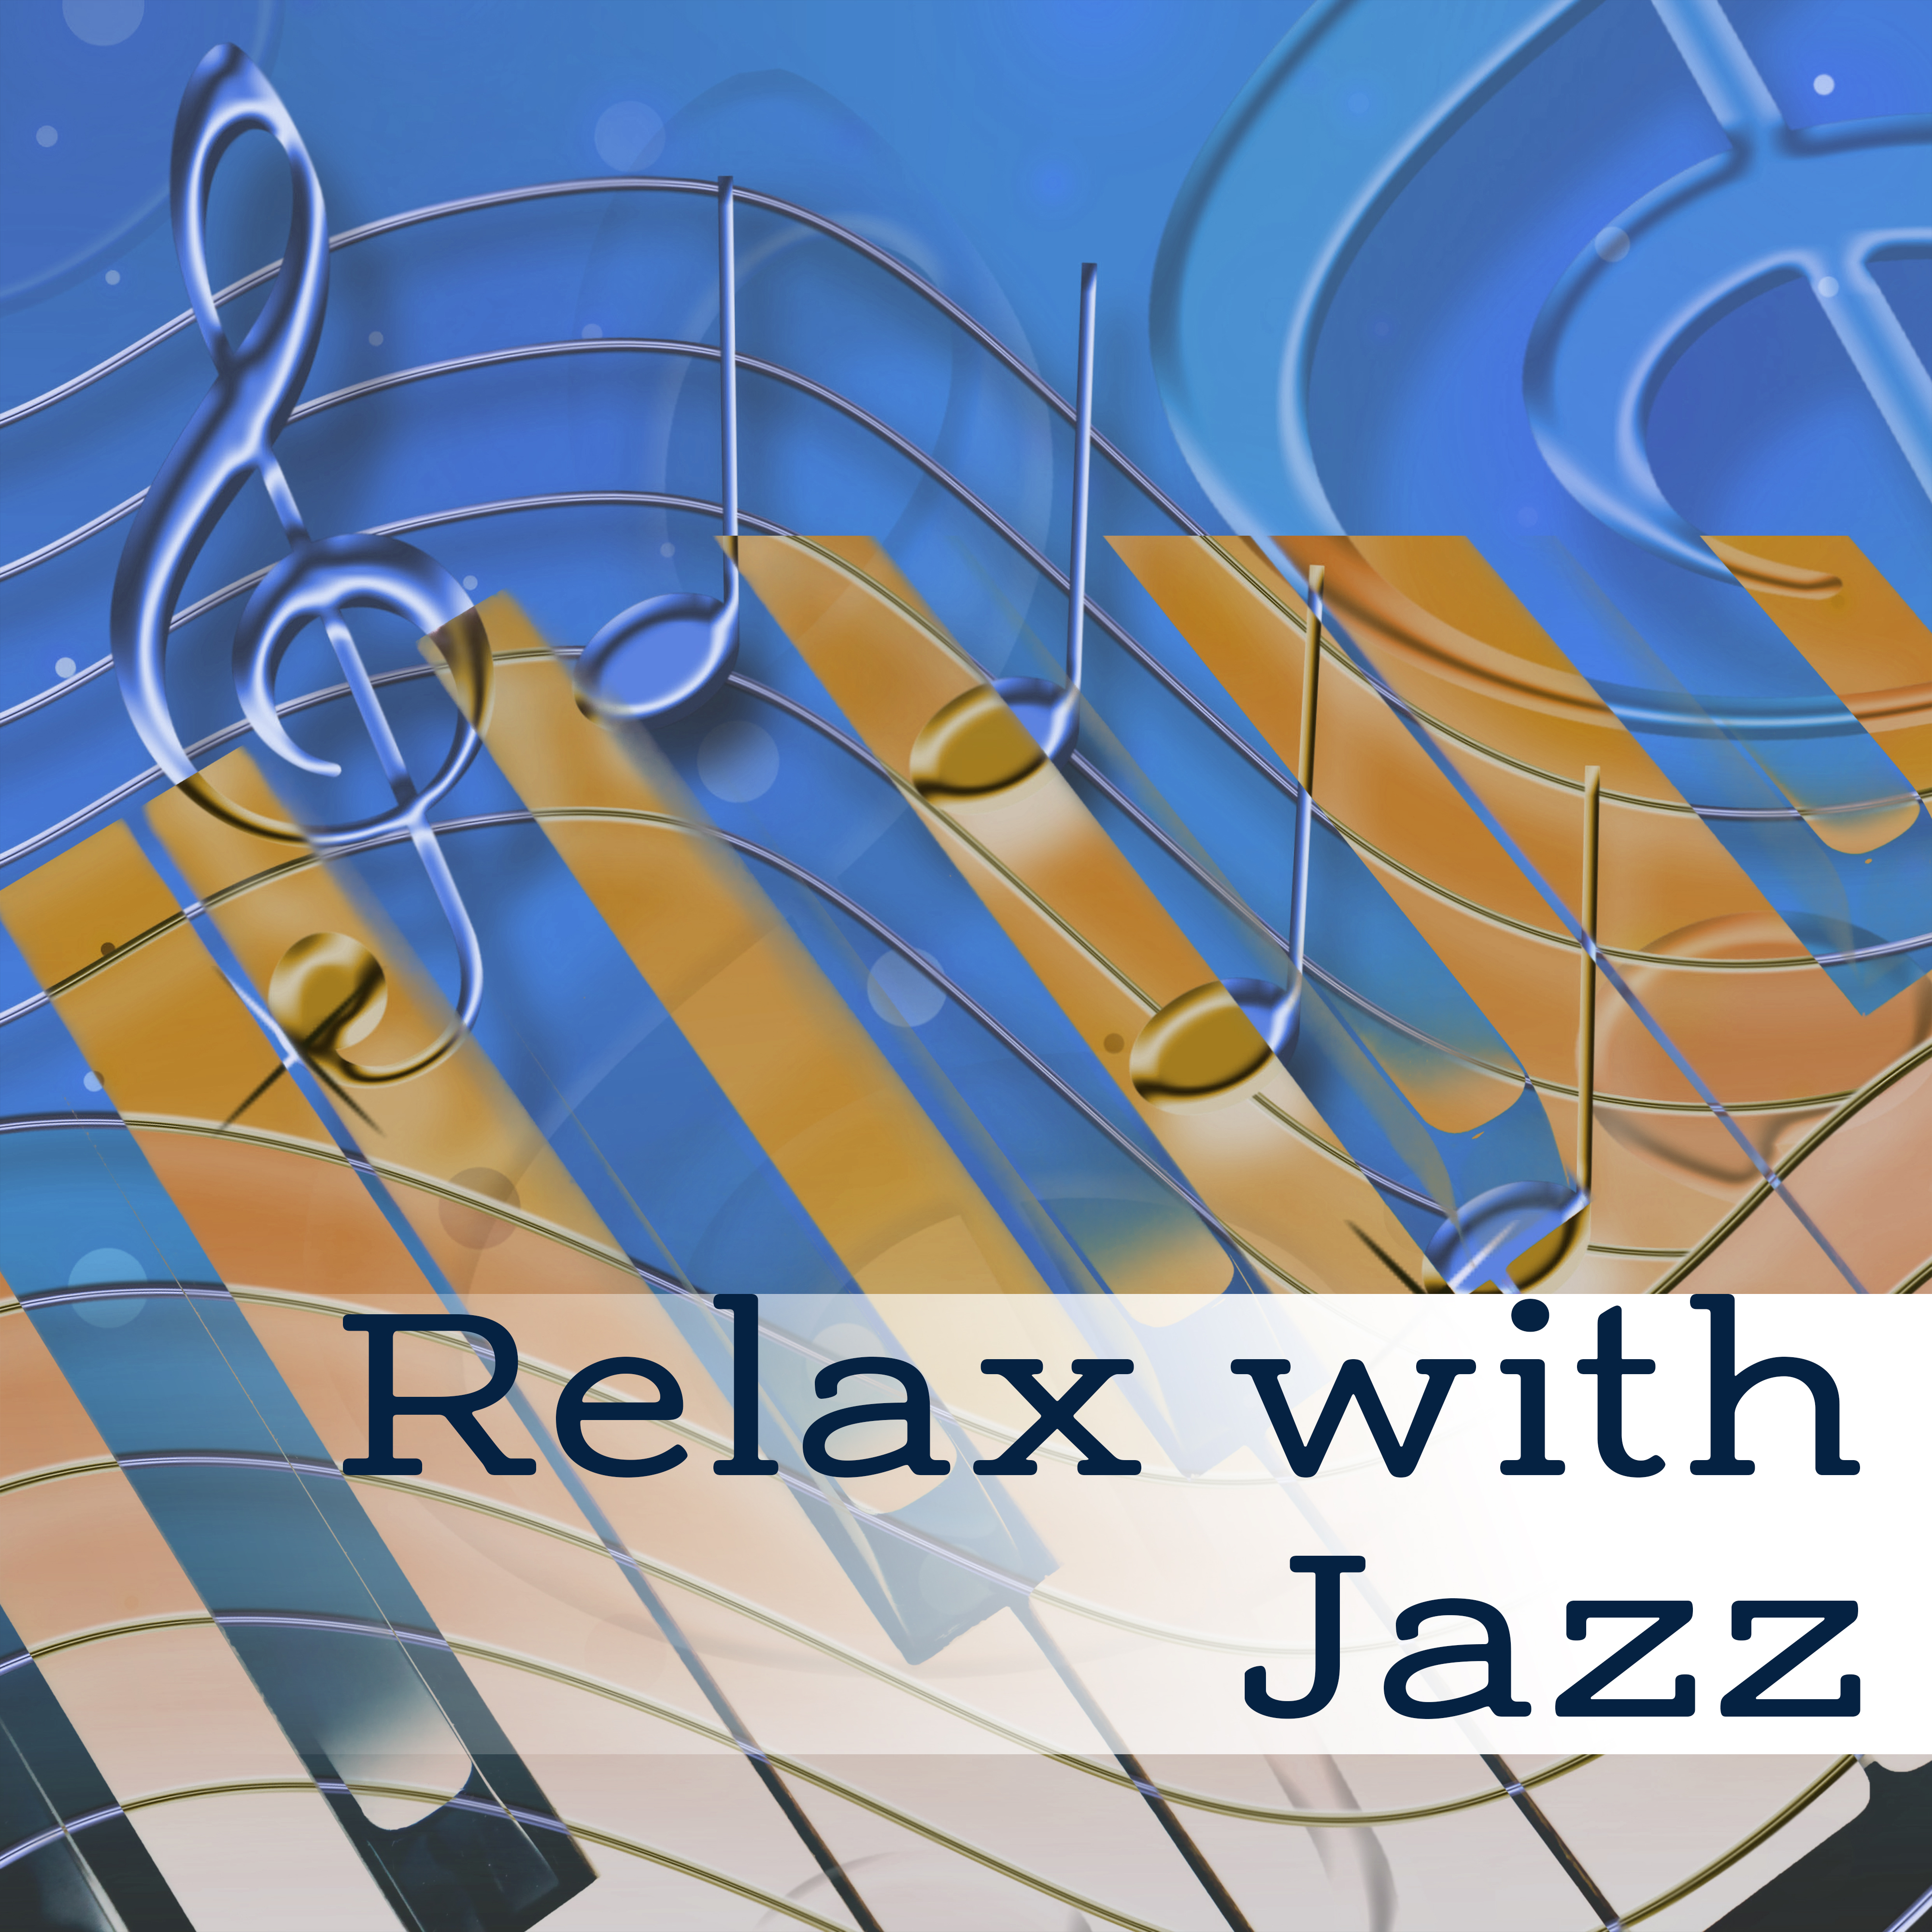 Relax with Jazz  Piano Relaxation, Peaceful Jazz at Night, Pure Rest, Jazz Relieves Stress, Smooth Jazz After Work, Relaxing Music